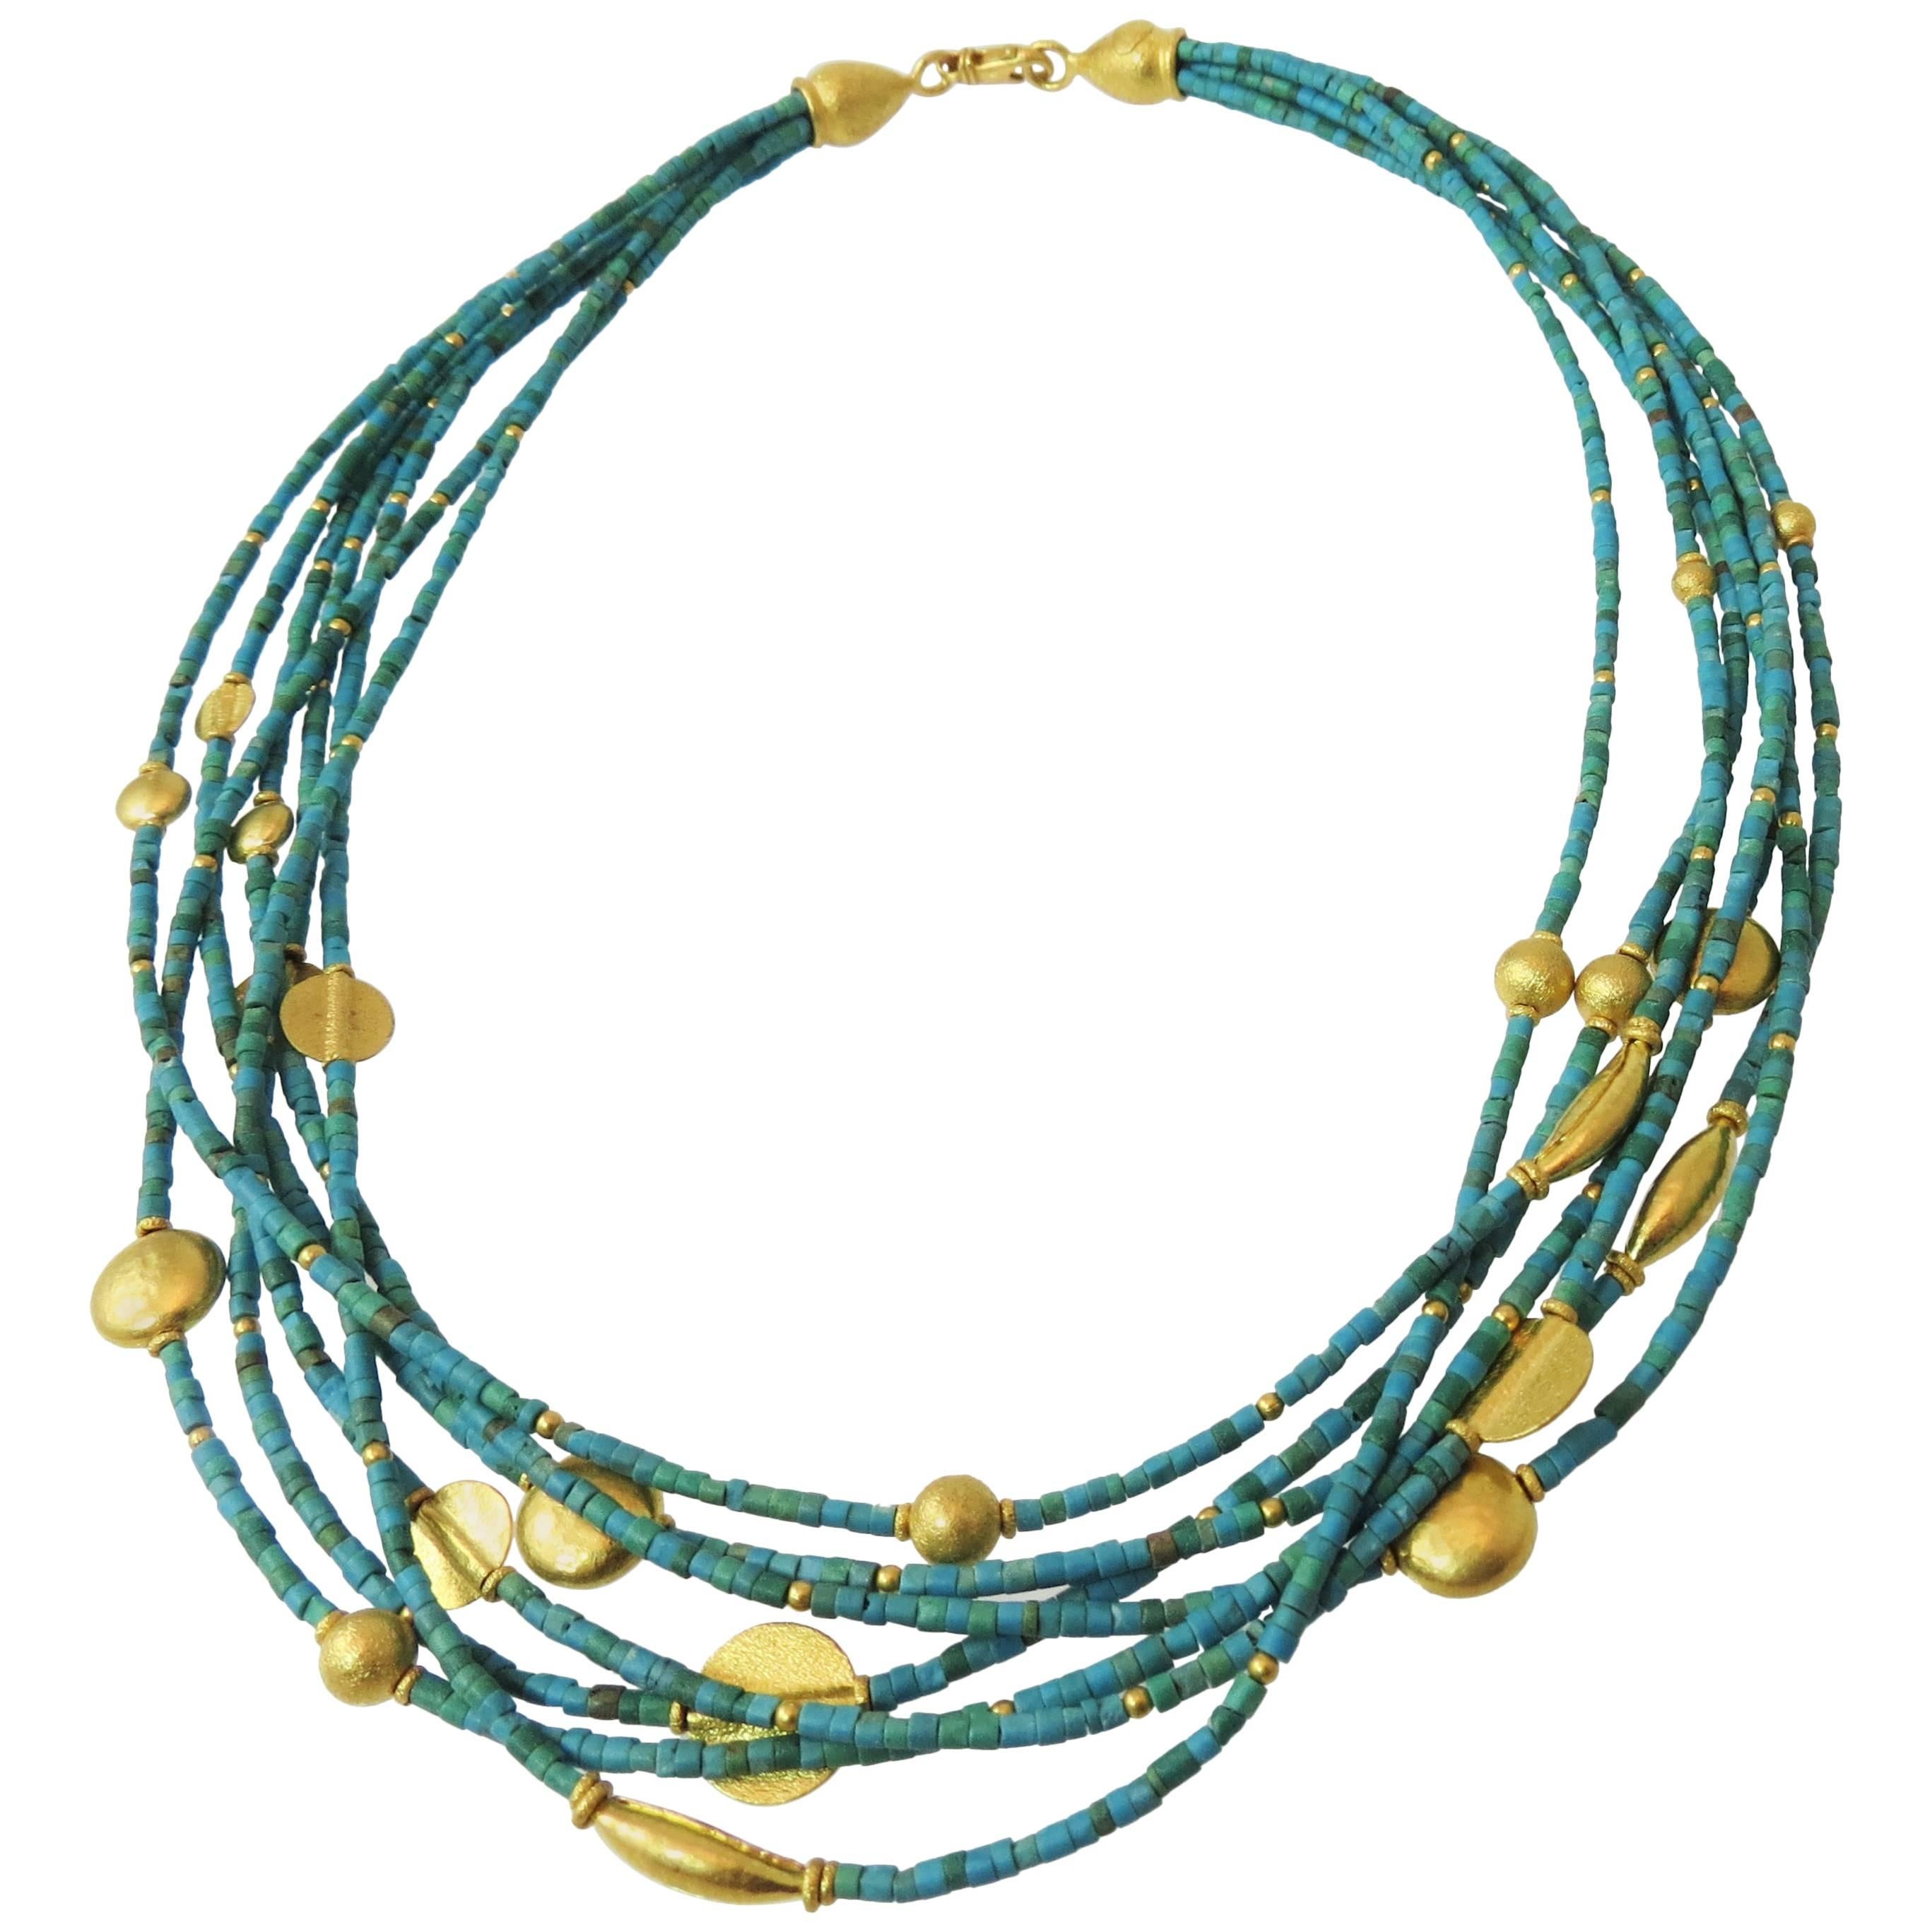 Fabulous Turquoise Gold Seven Strand Bead Necklace